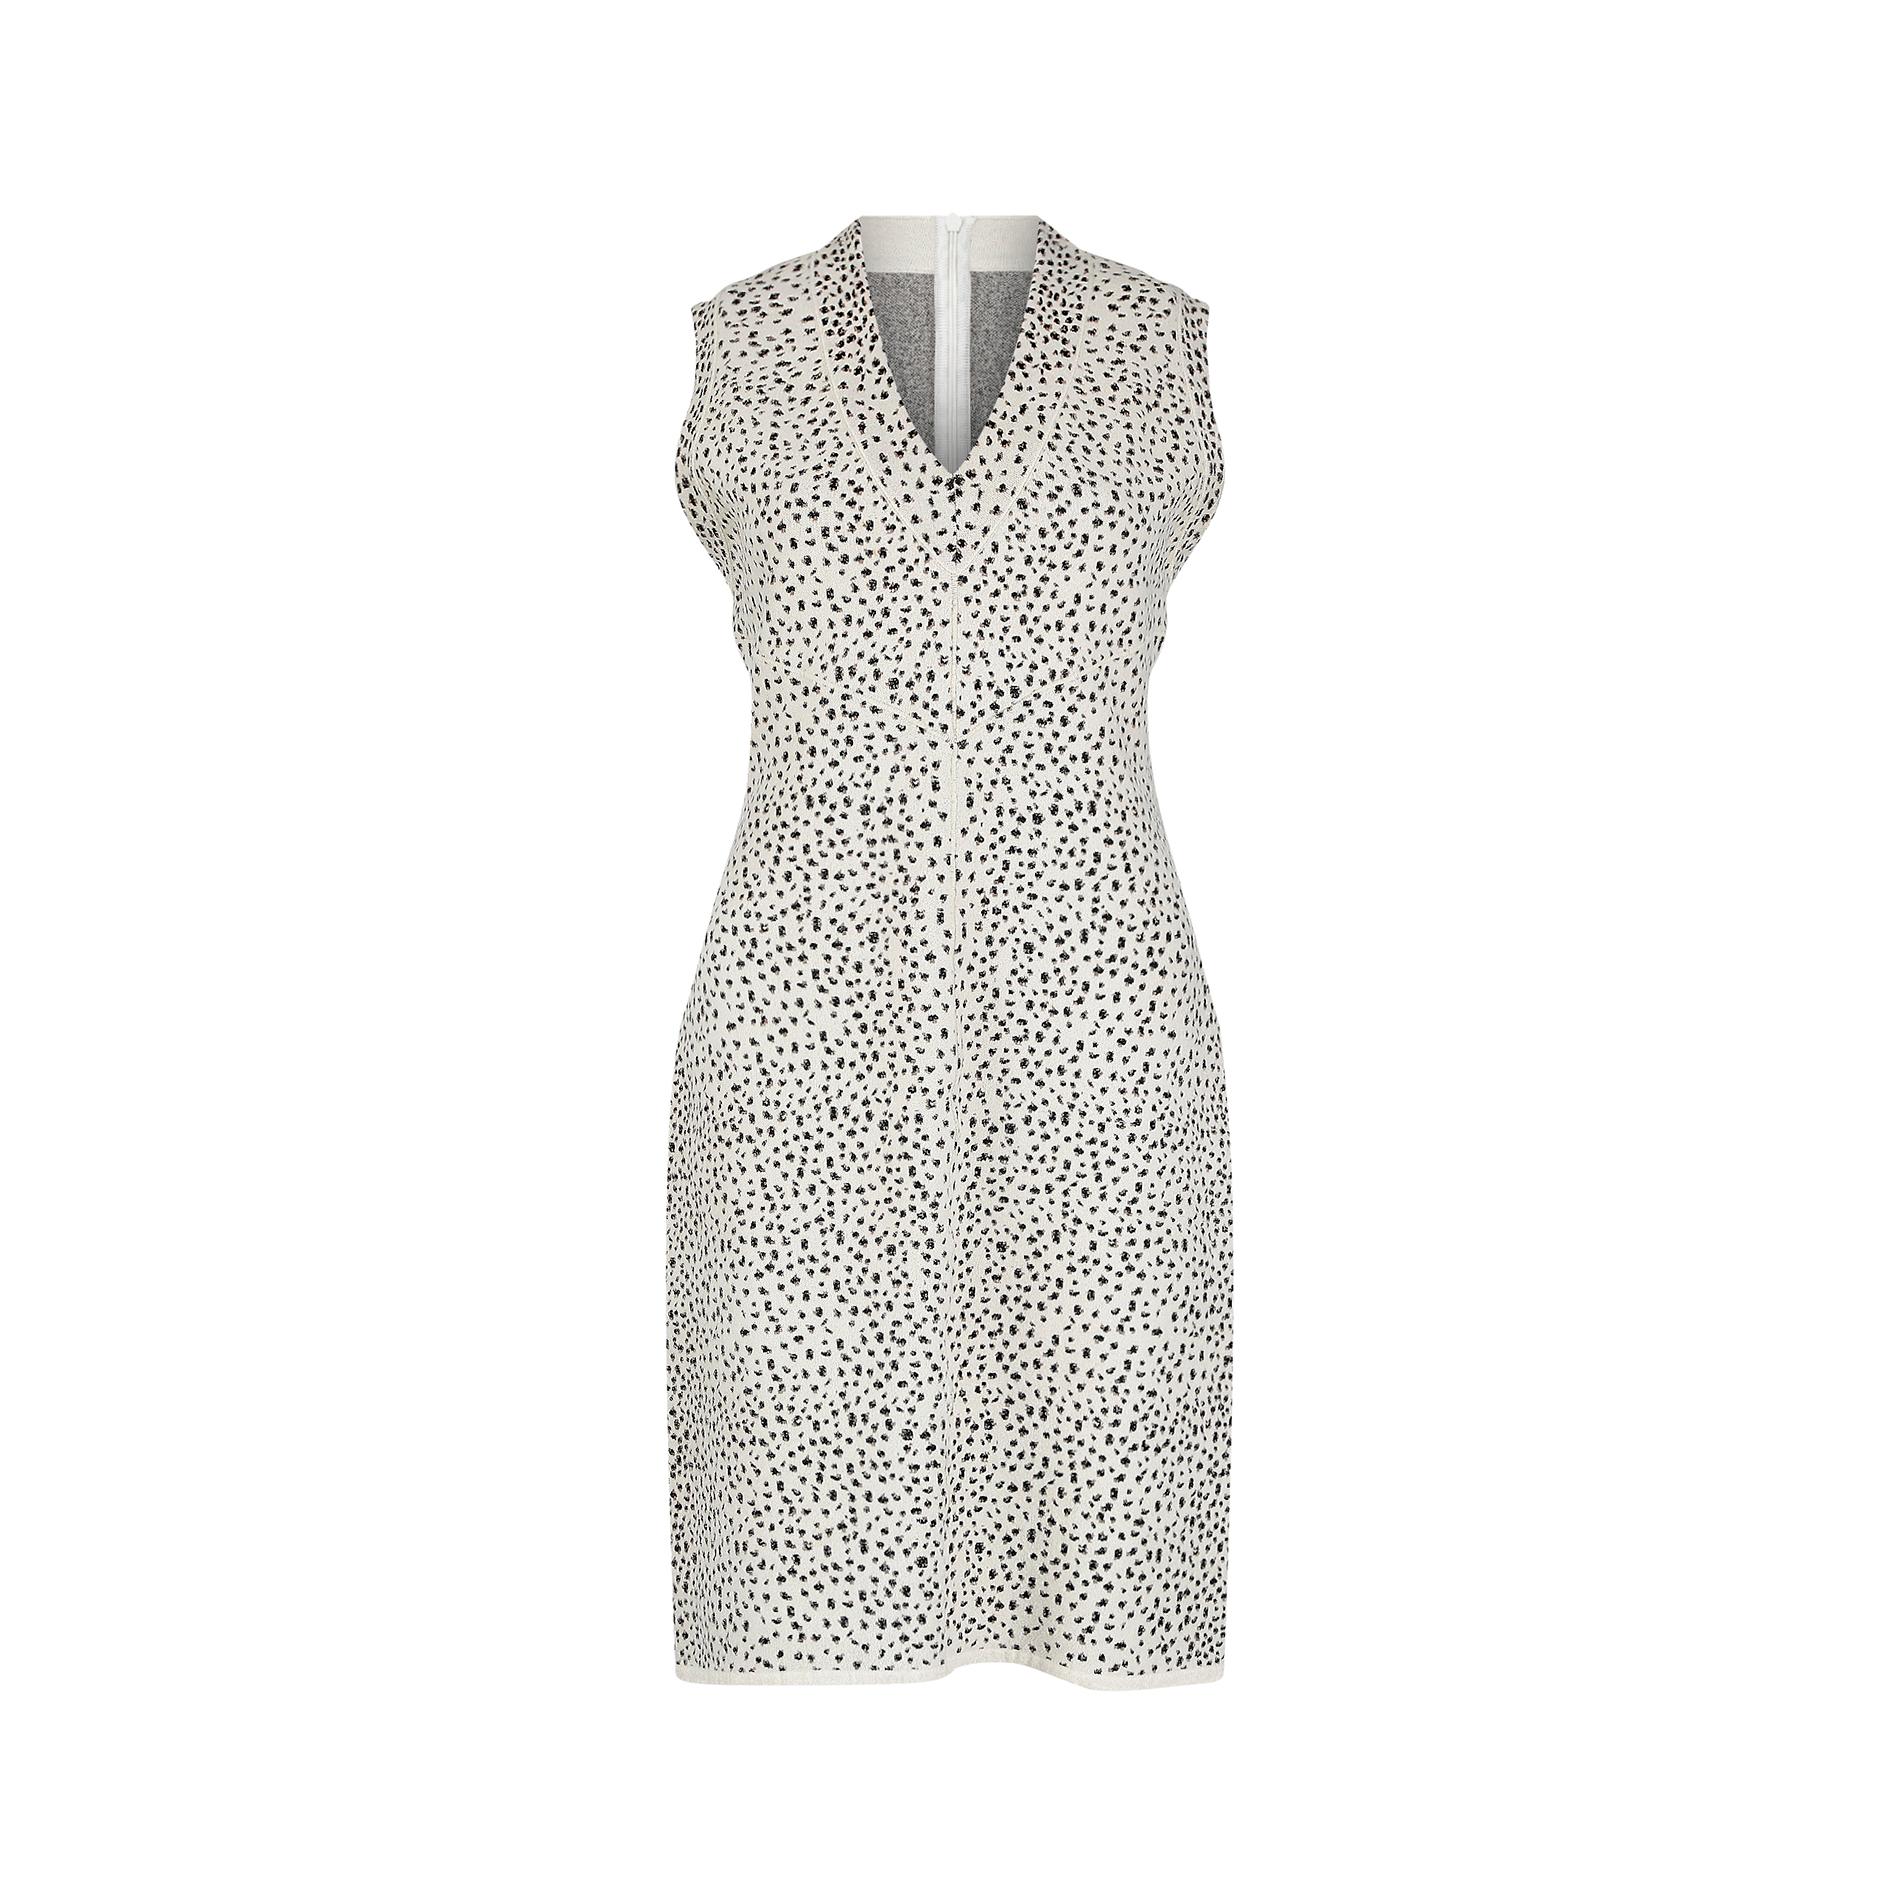 This animal print sheath dress by Alaia dates from the mid 2000s to 2010s but still retains many of the styling elements for which Azzedine Alaia became famous for in the 1980s. It has a V neckline and striking contrast seam detail to the bust area,